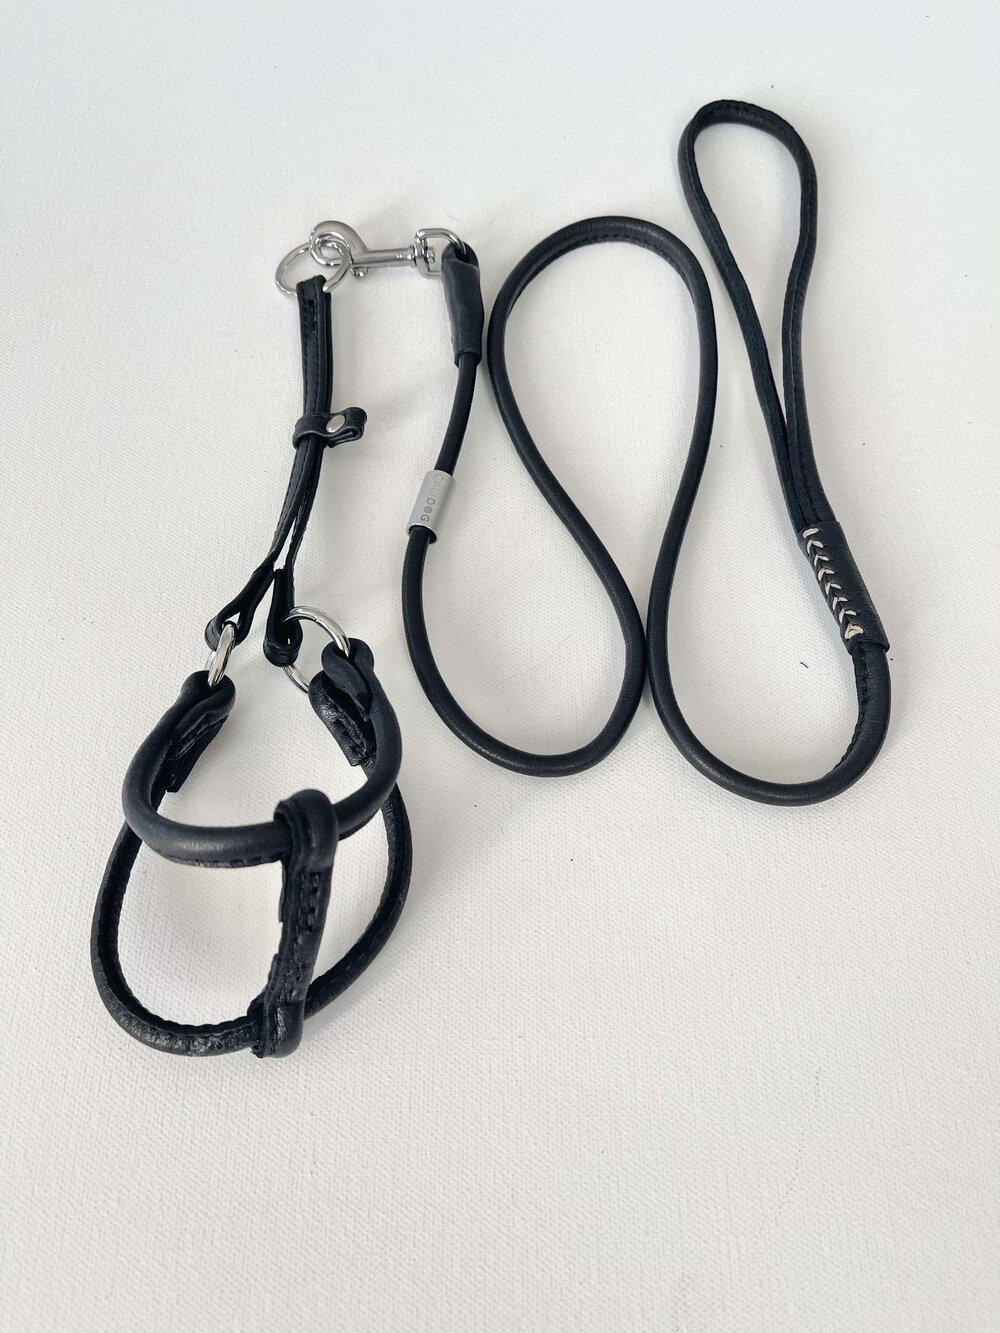 leather dog harness